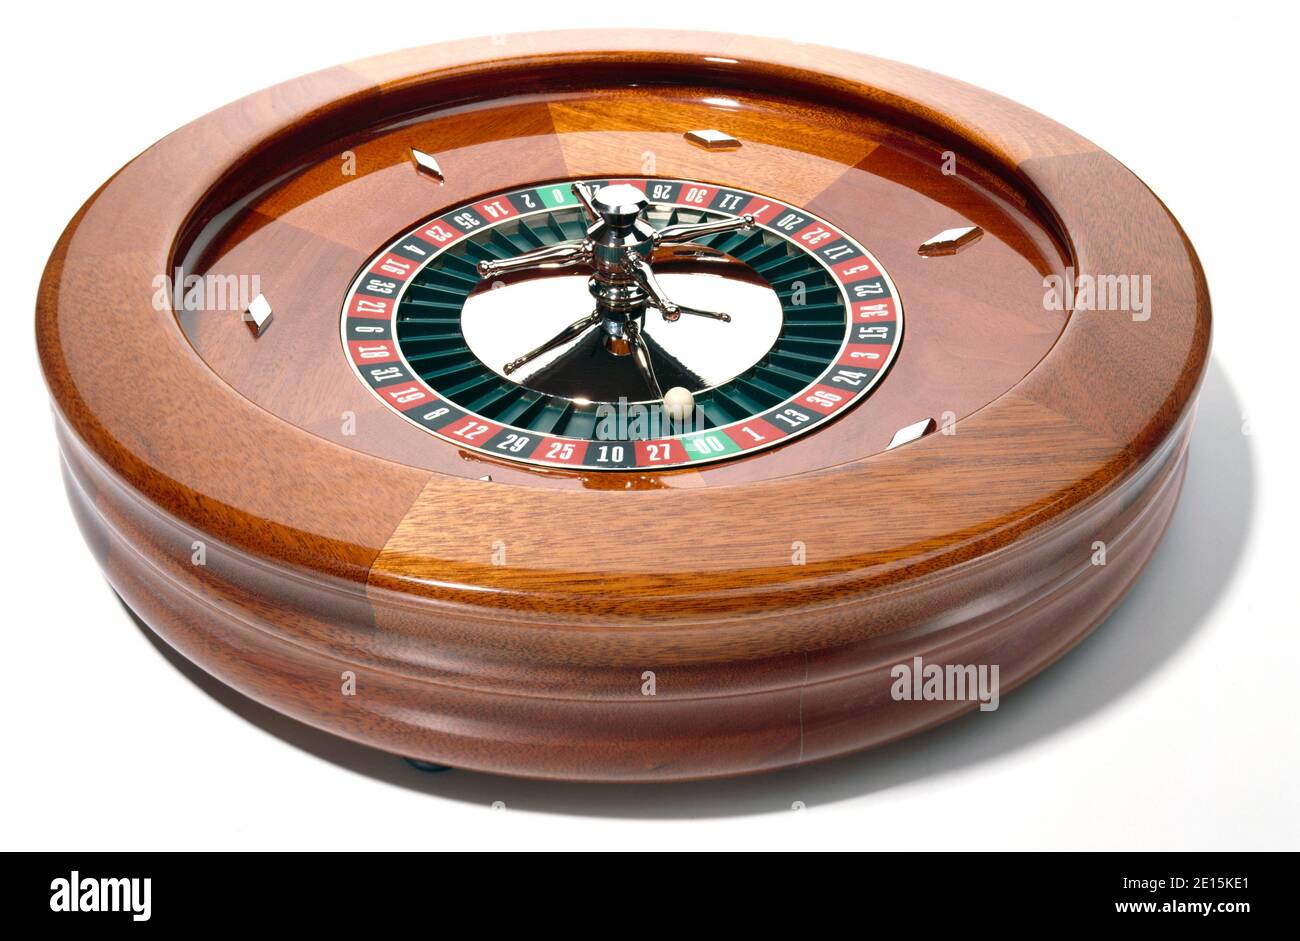 Wooden roulette wheel photographed on a white background Stock Photo